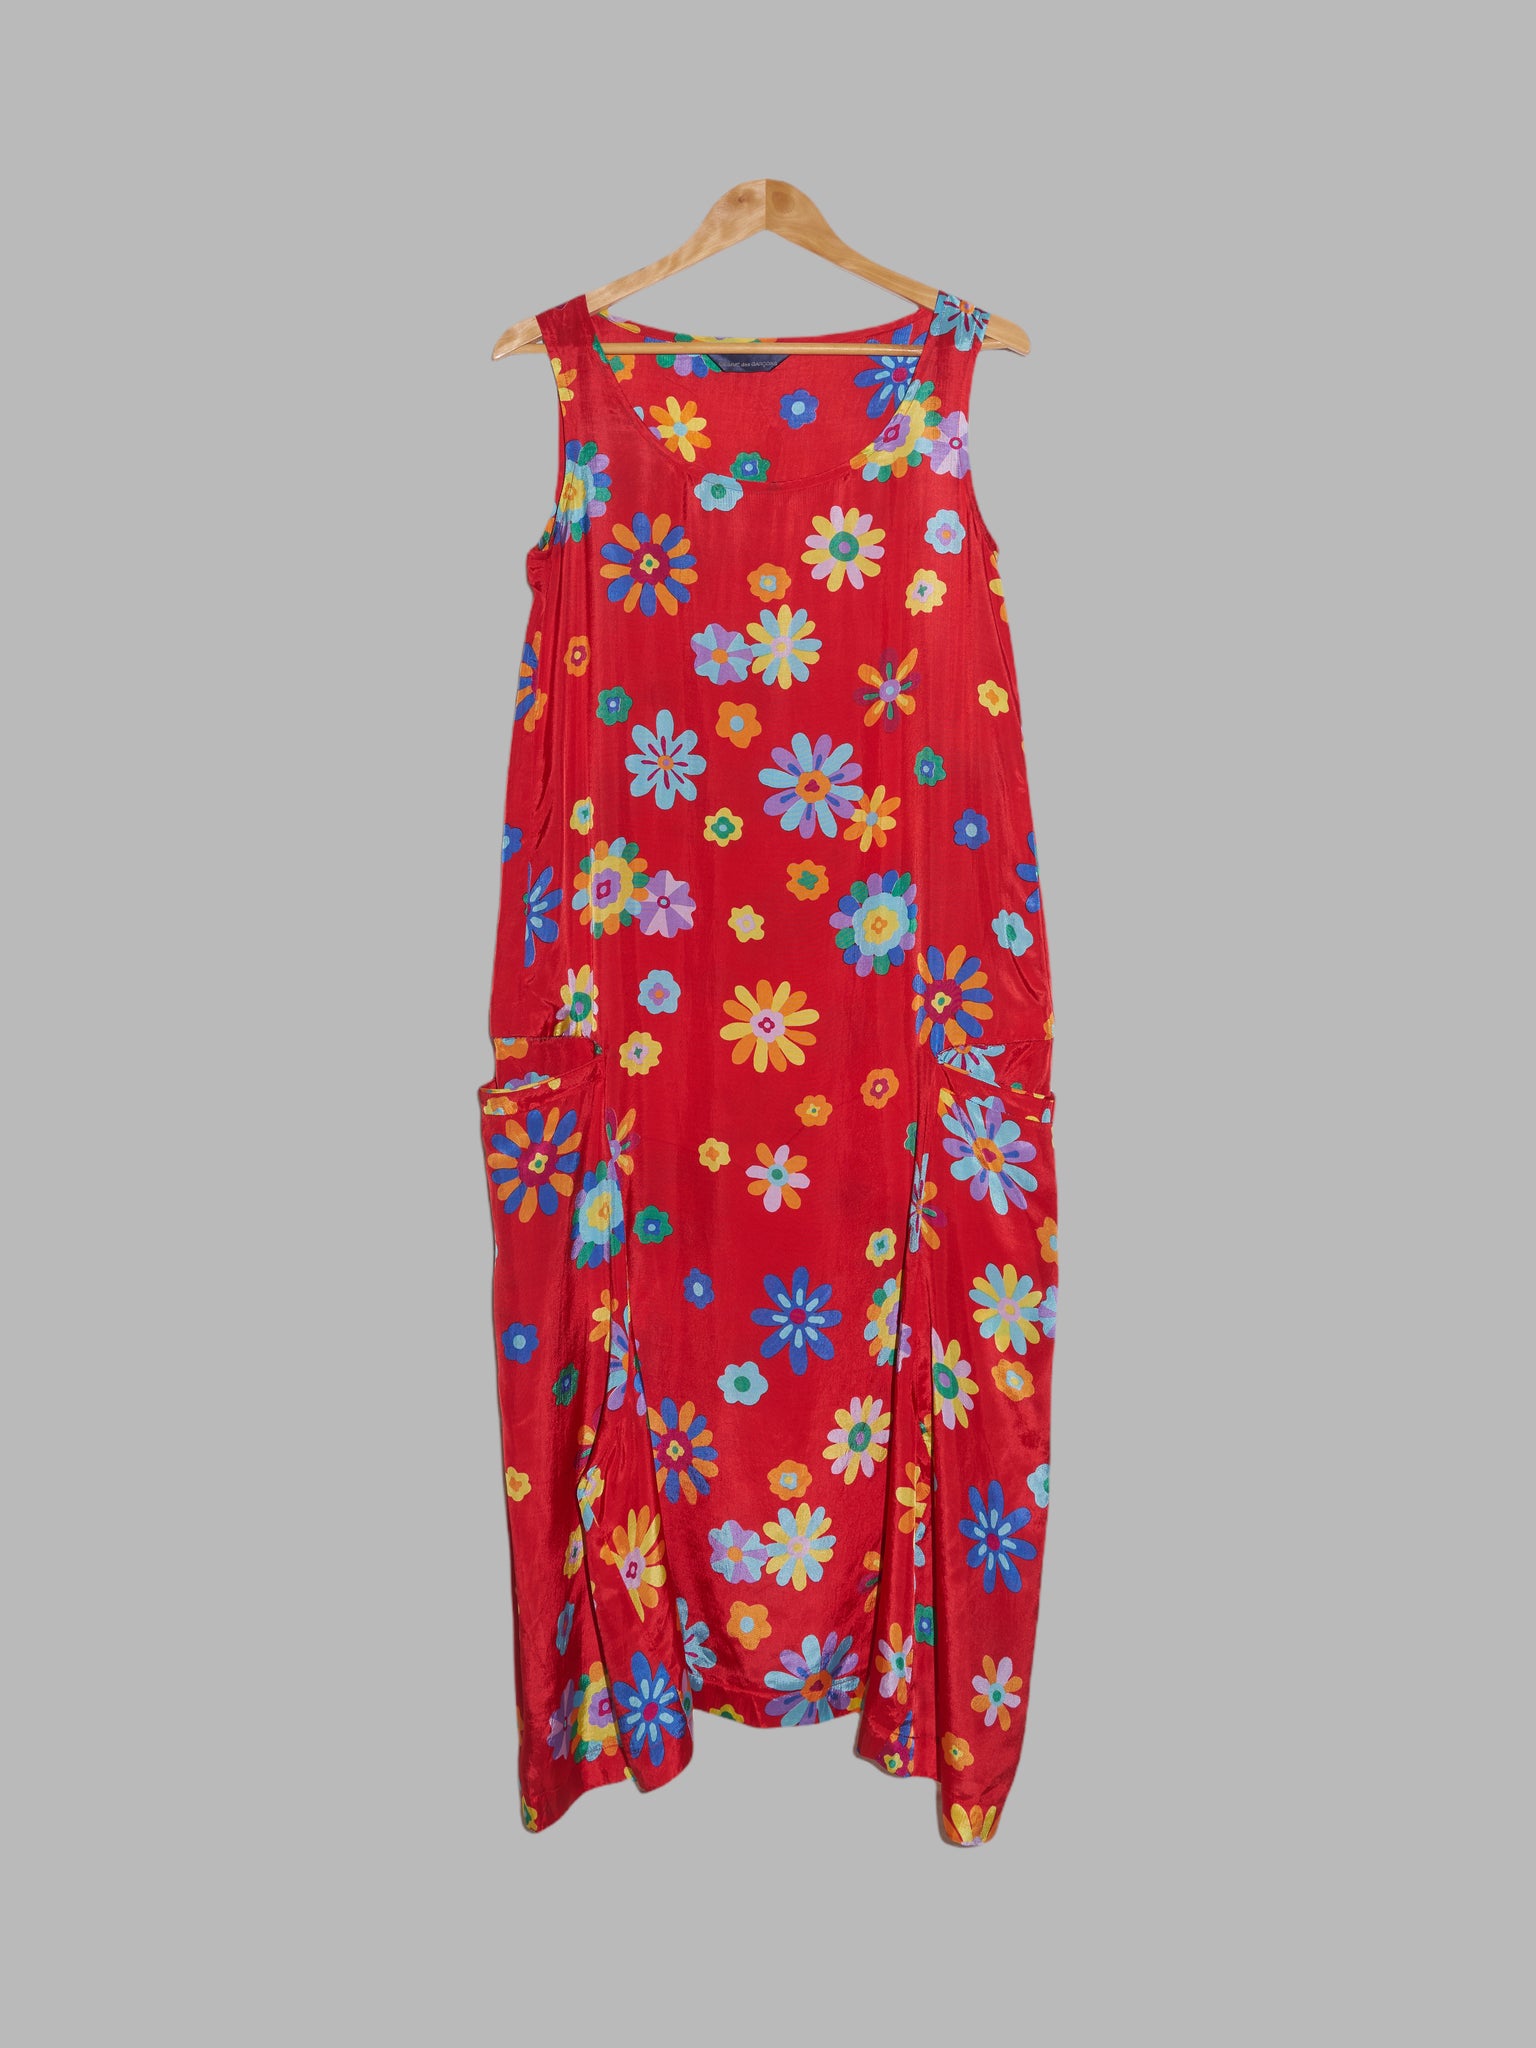 Comme des Garcons 1996 red floral print rayon sleeveless maxi dress